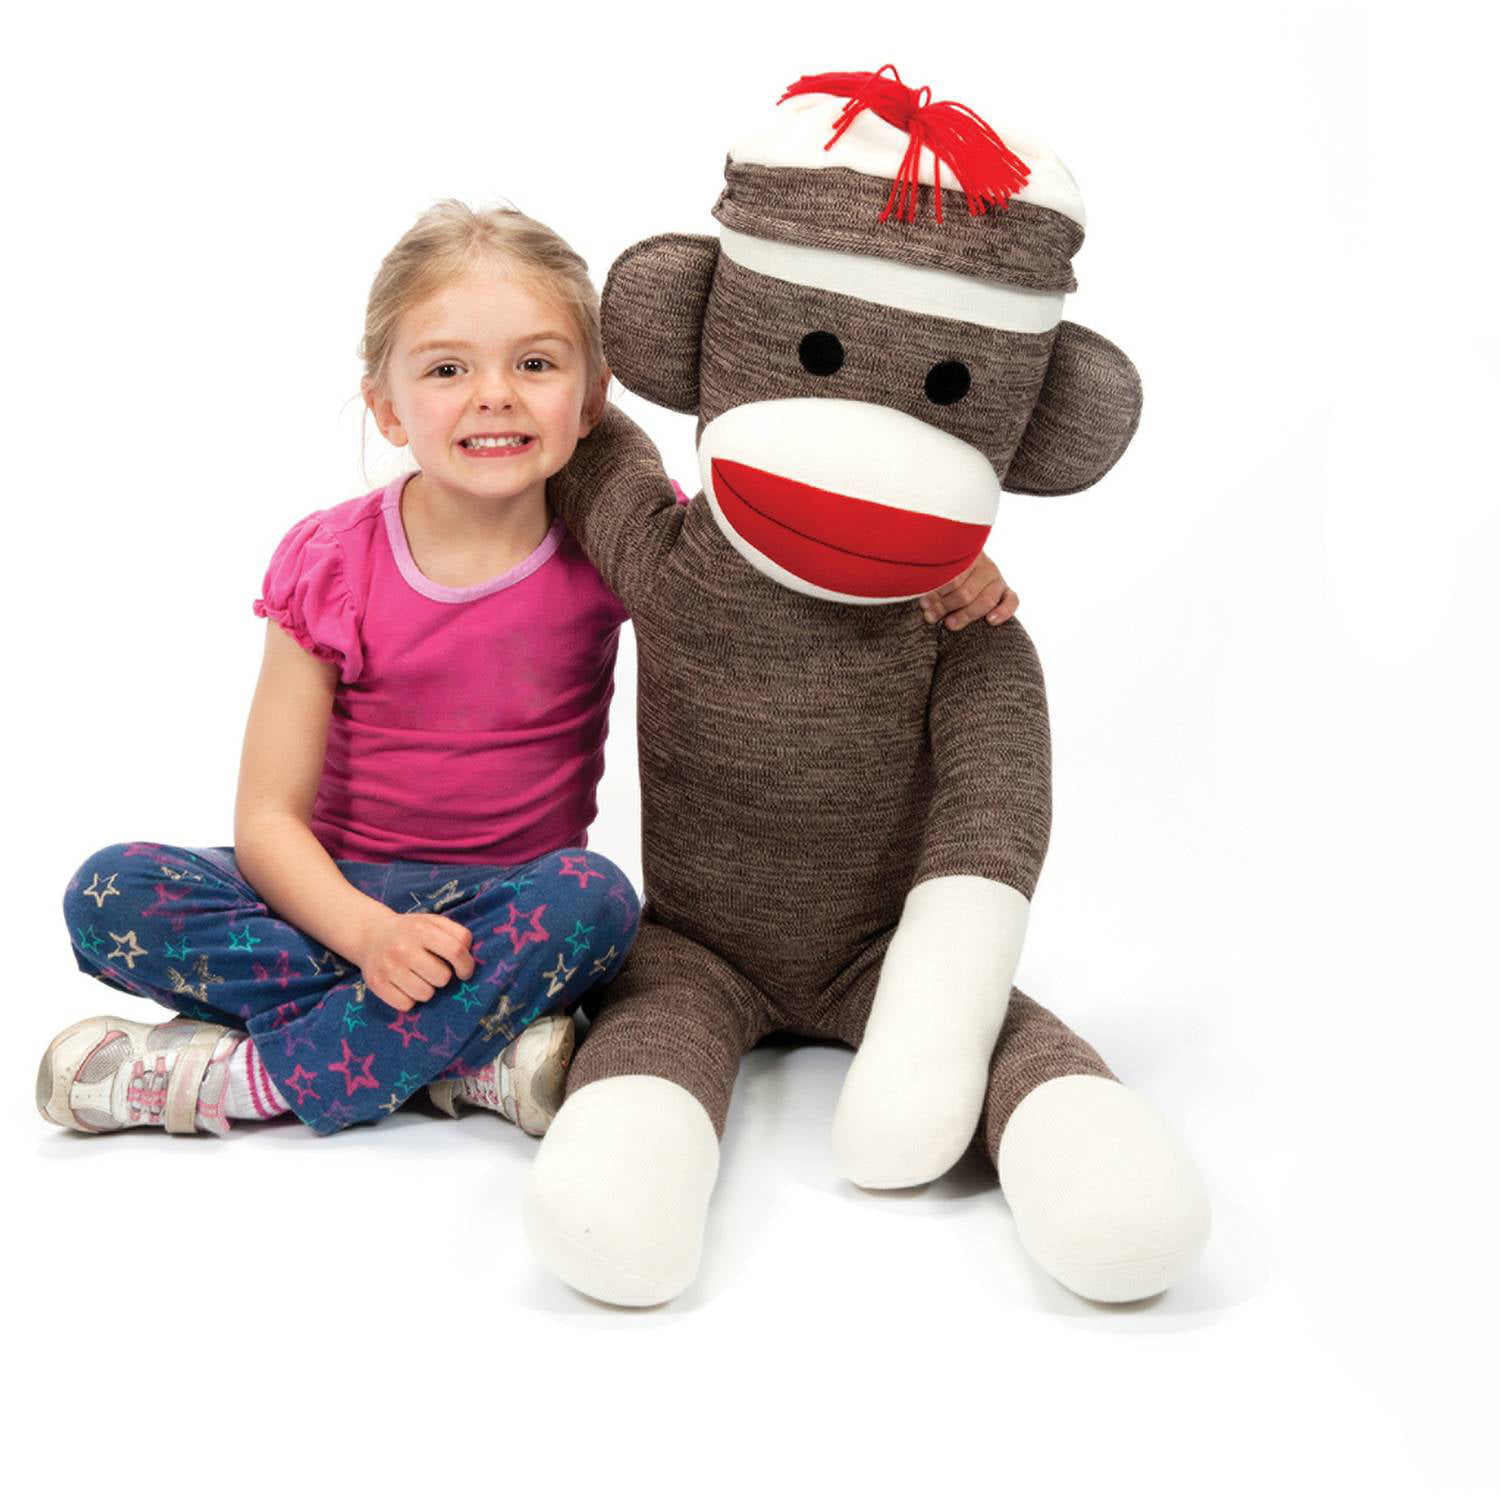 Sock Monkey Baby Mini Schylling Small Brown Toy Plush Doll for sale online 